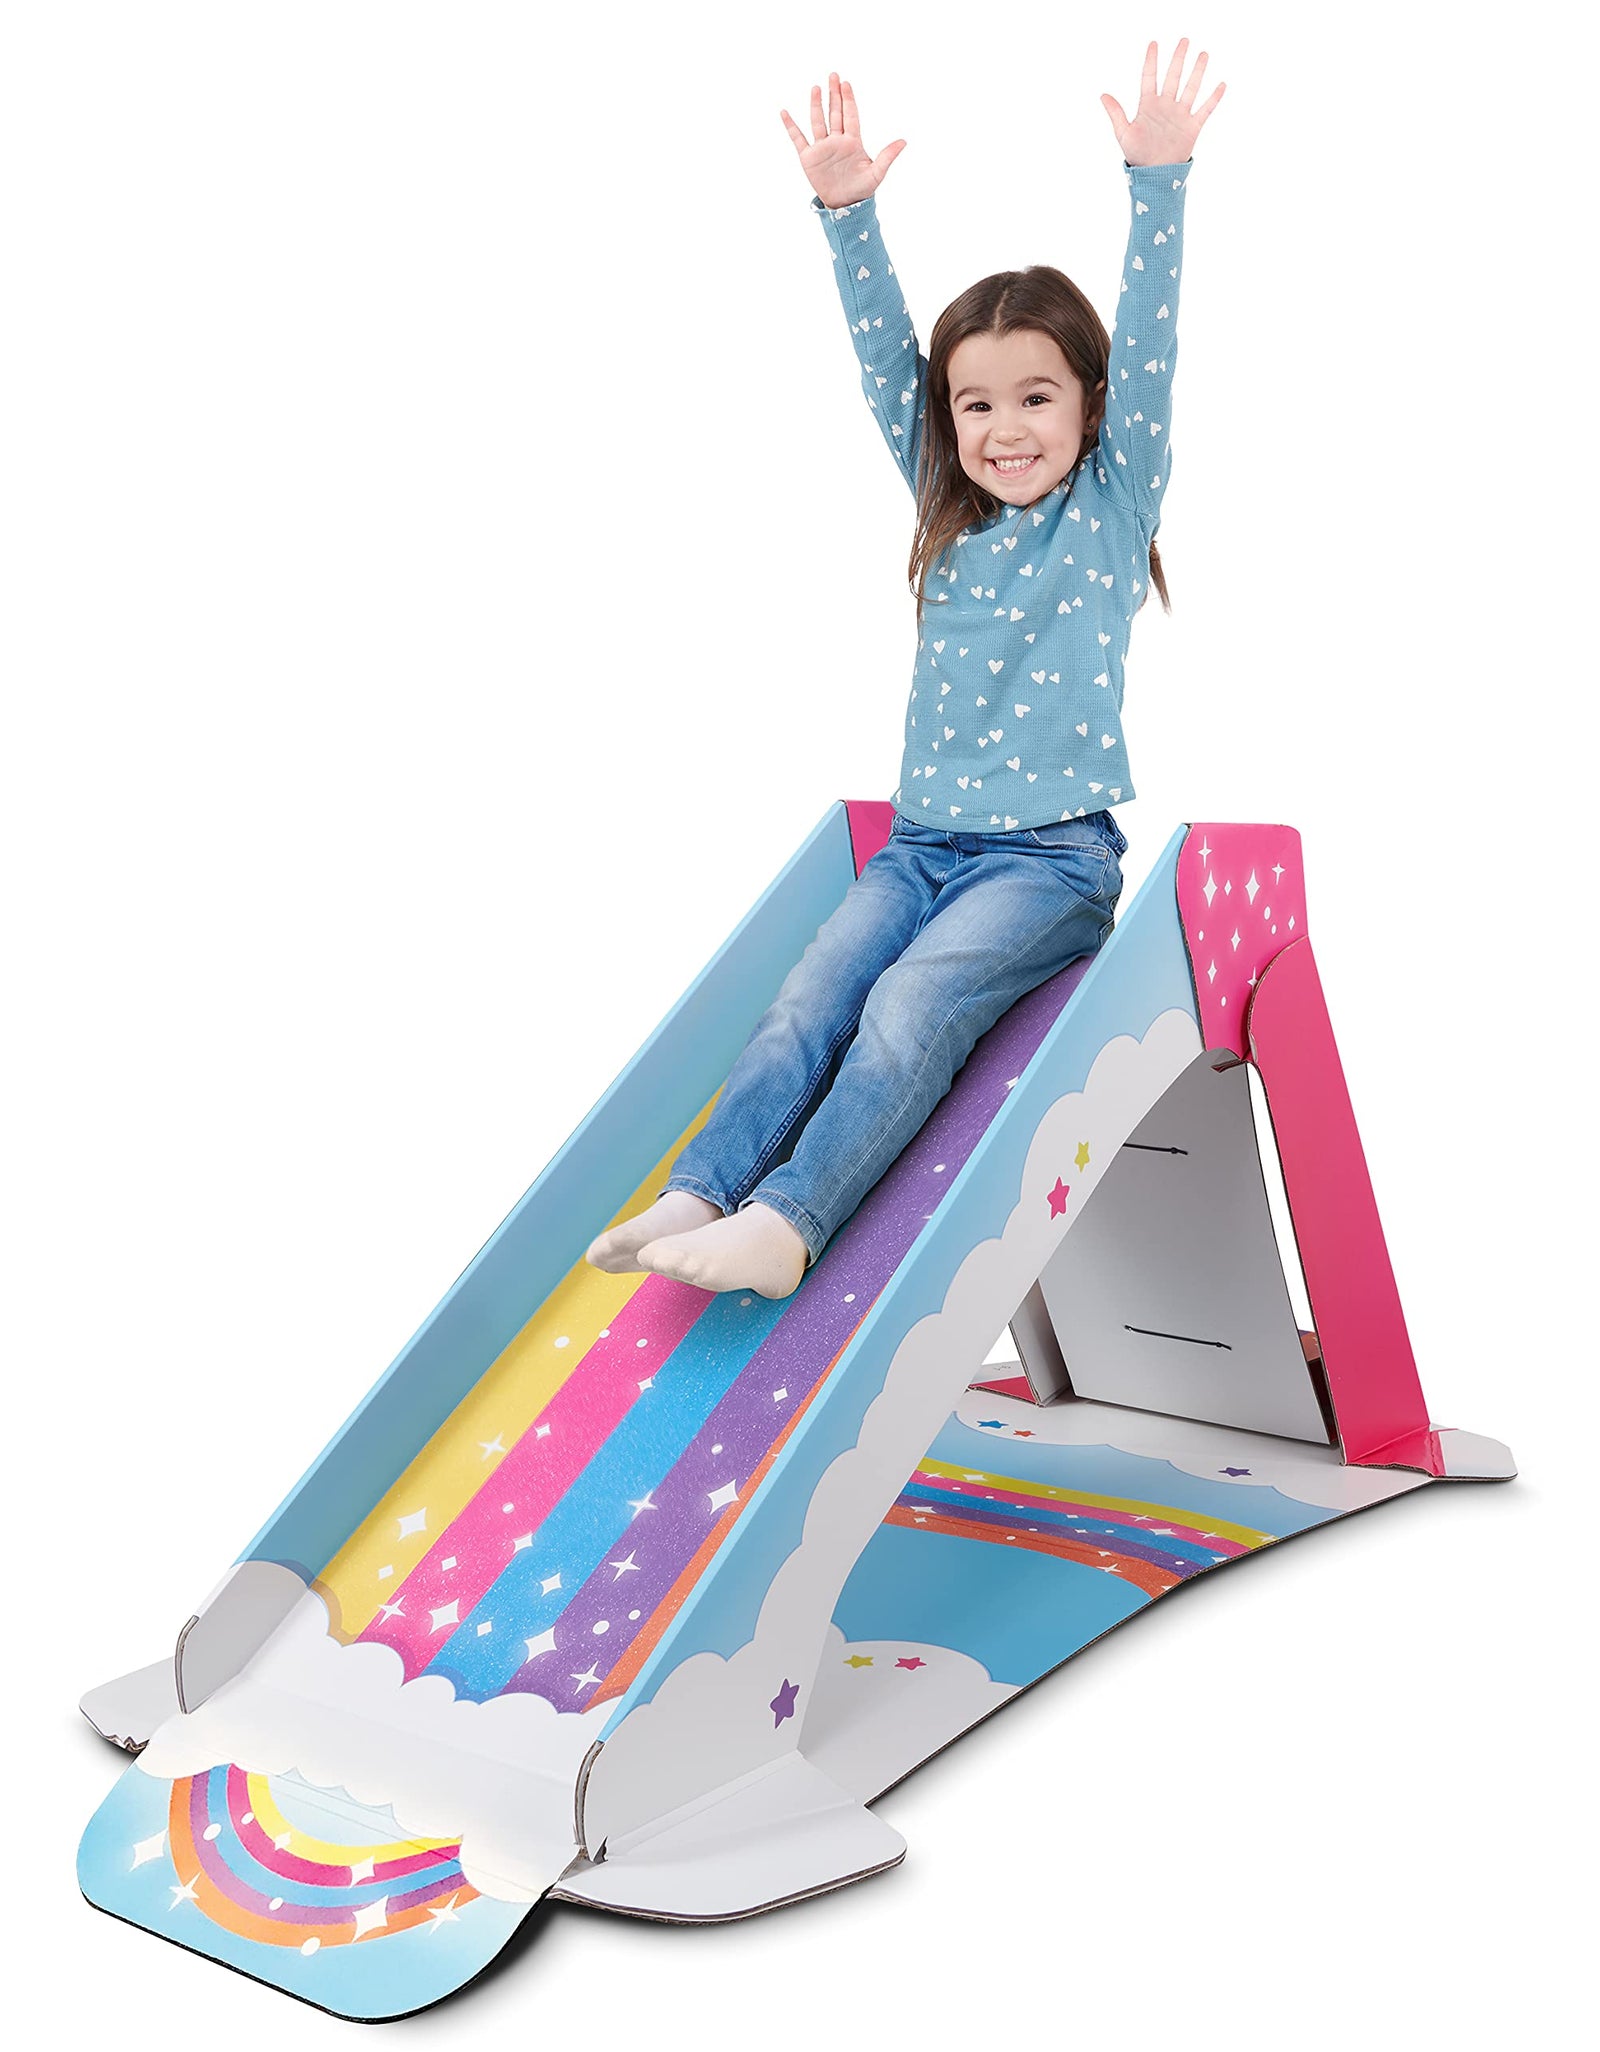 WowWee Kids Slide Indoor – Playground for Toddlers – StrongFold Technology Cardboard Toddler Slide by Pop2Play (Rainbow)